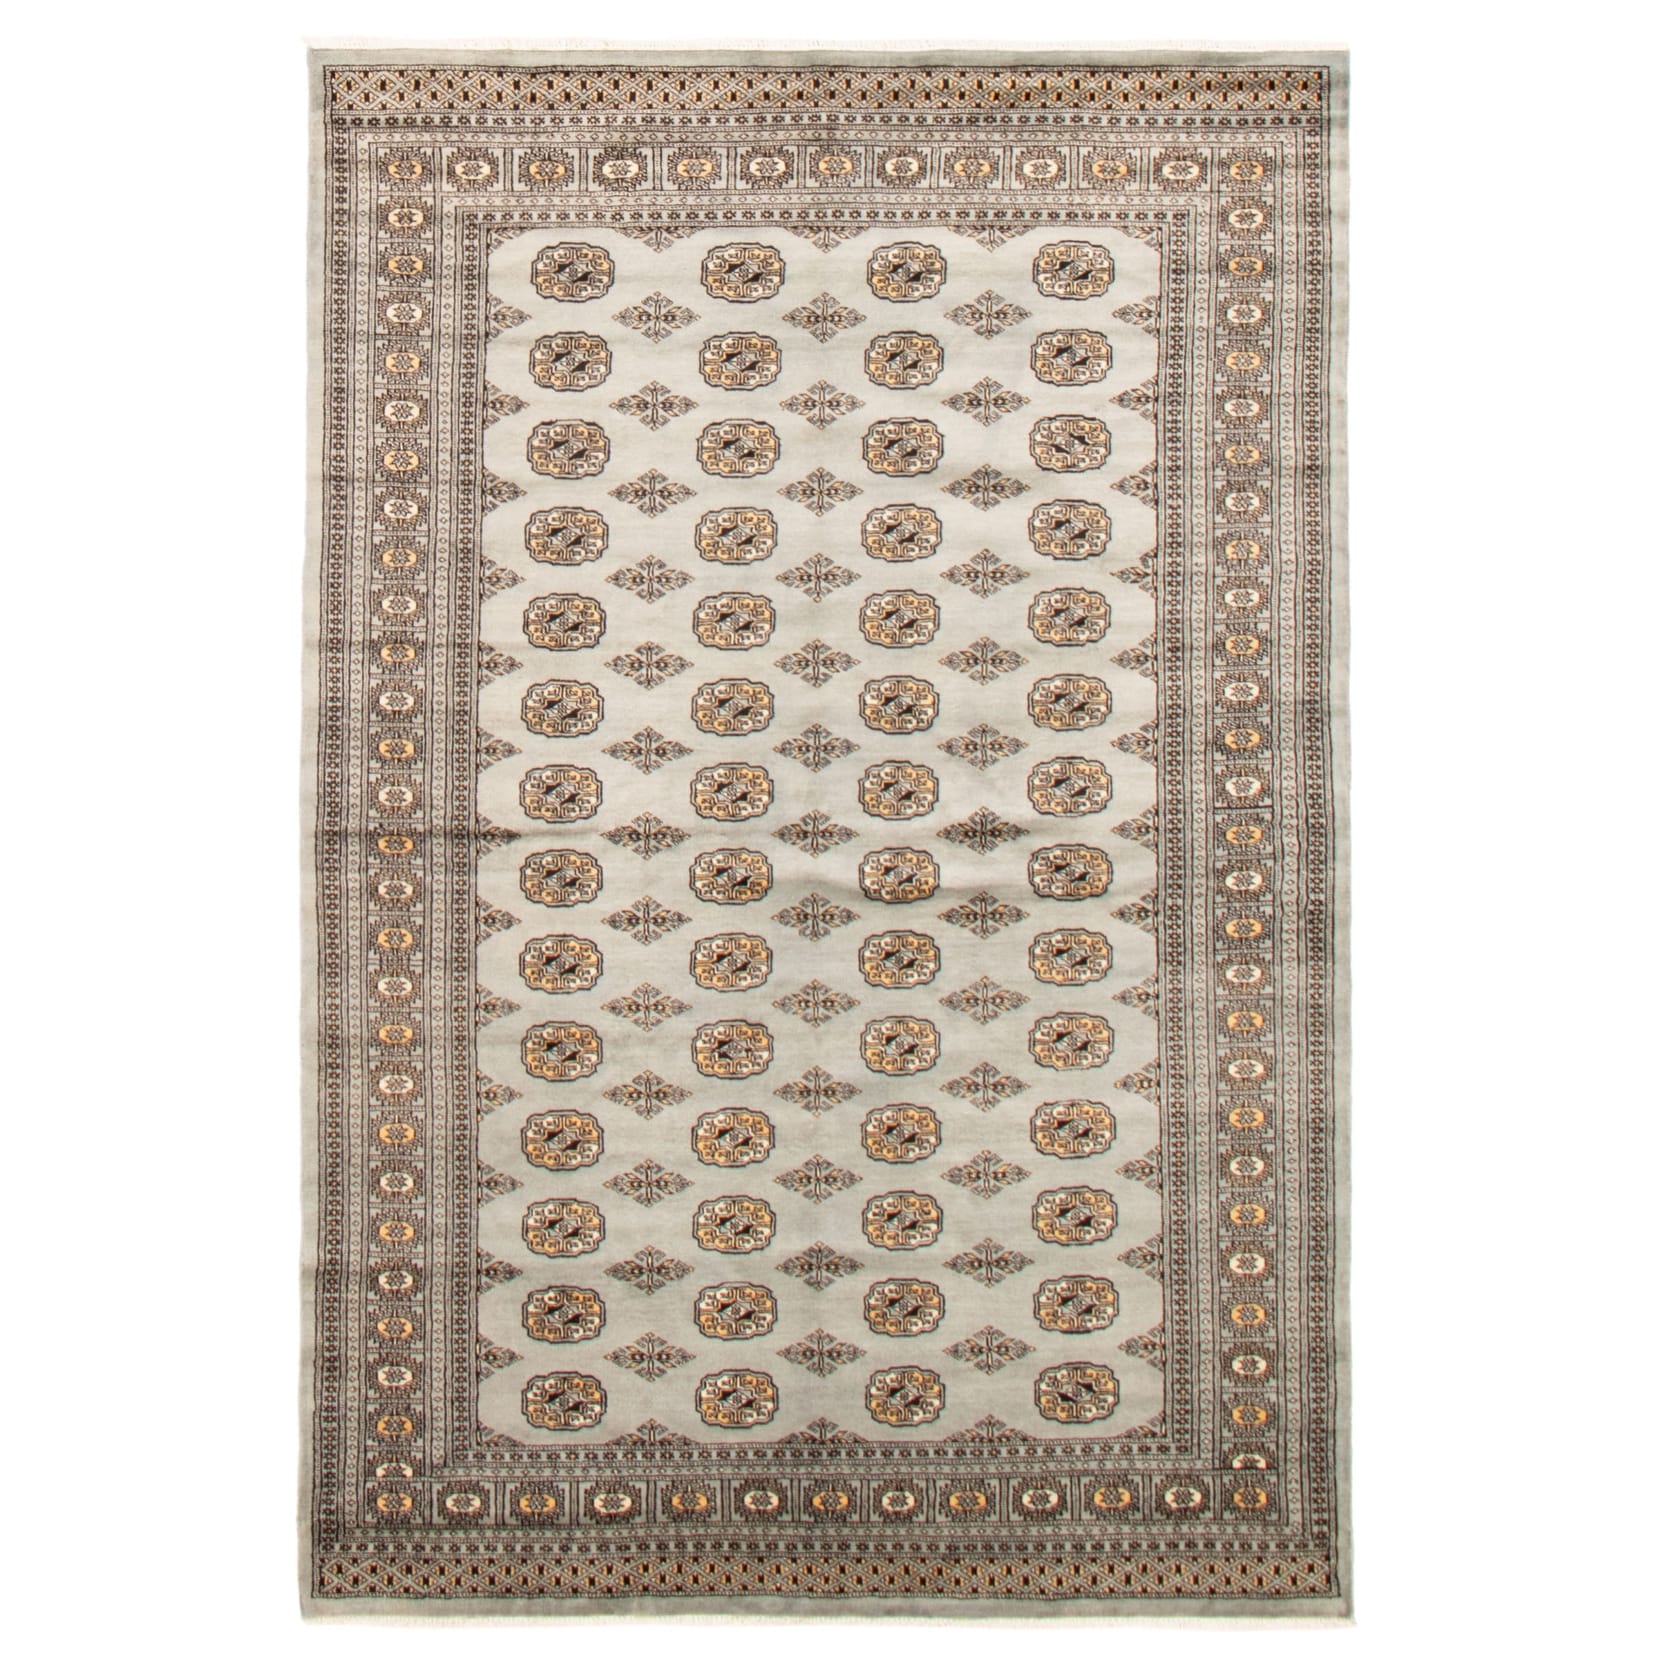 Finest Peshawar Bokhara Bordered Brown Rug 8'11 x 11'9 eCarpet Gallery Large Area Rug for Living Room Bedroom Hand-Knotted Wool Rug 363148 